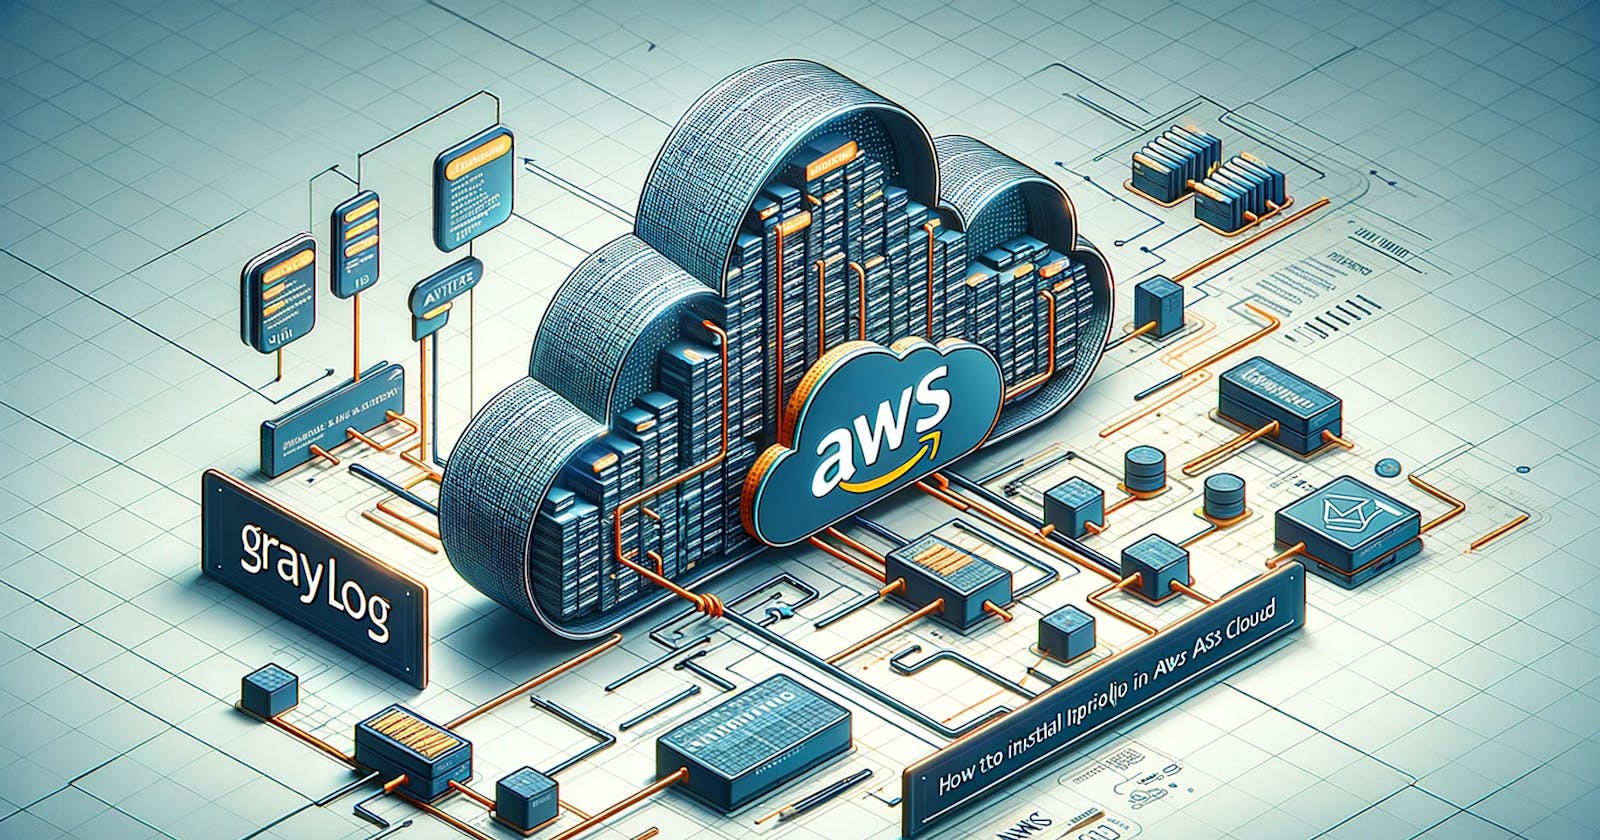 How to install Graylog in AWS Cloud